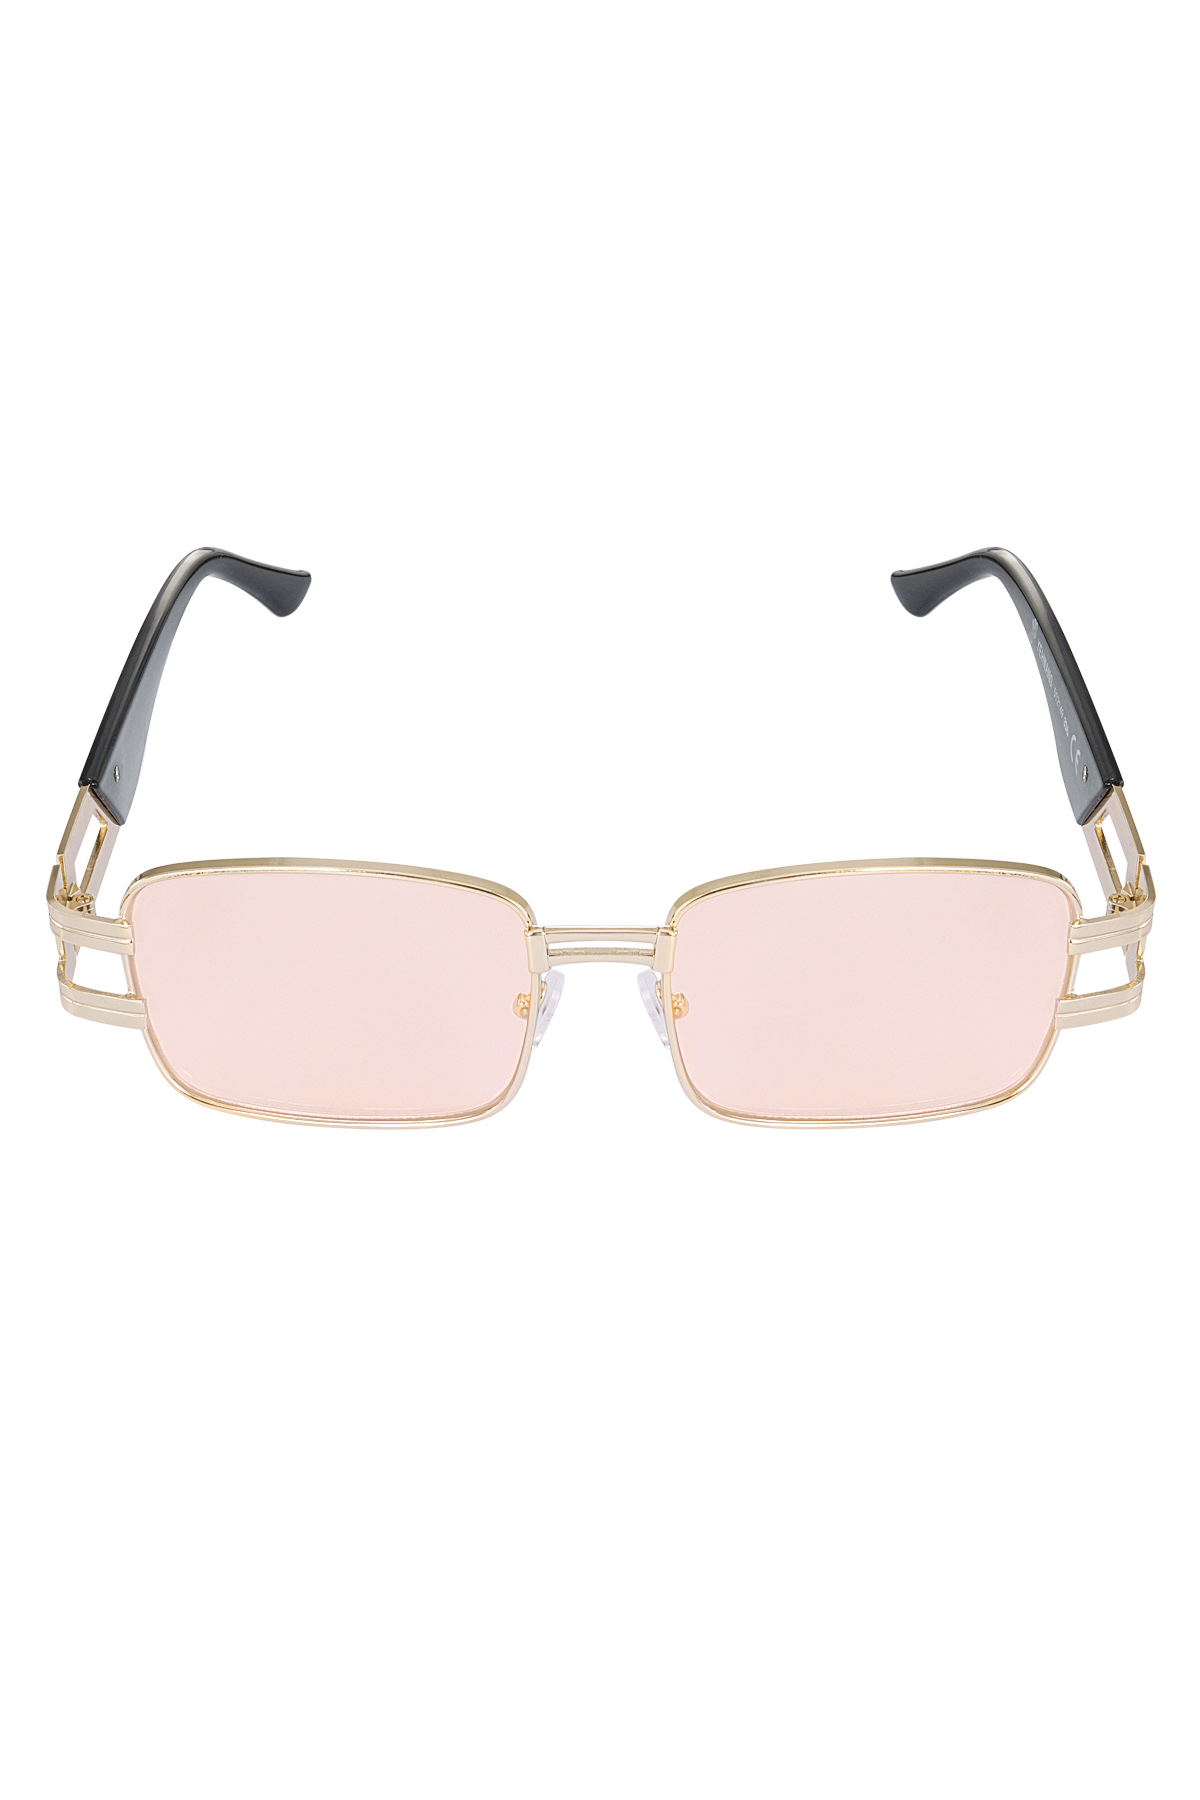 Sunglasses simple metal essential - pink gold h5 Picture4